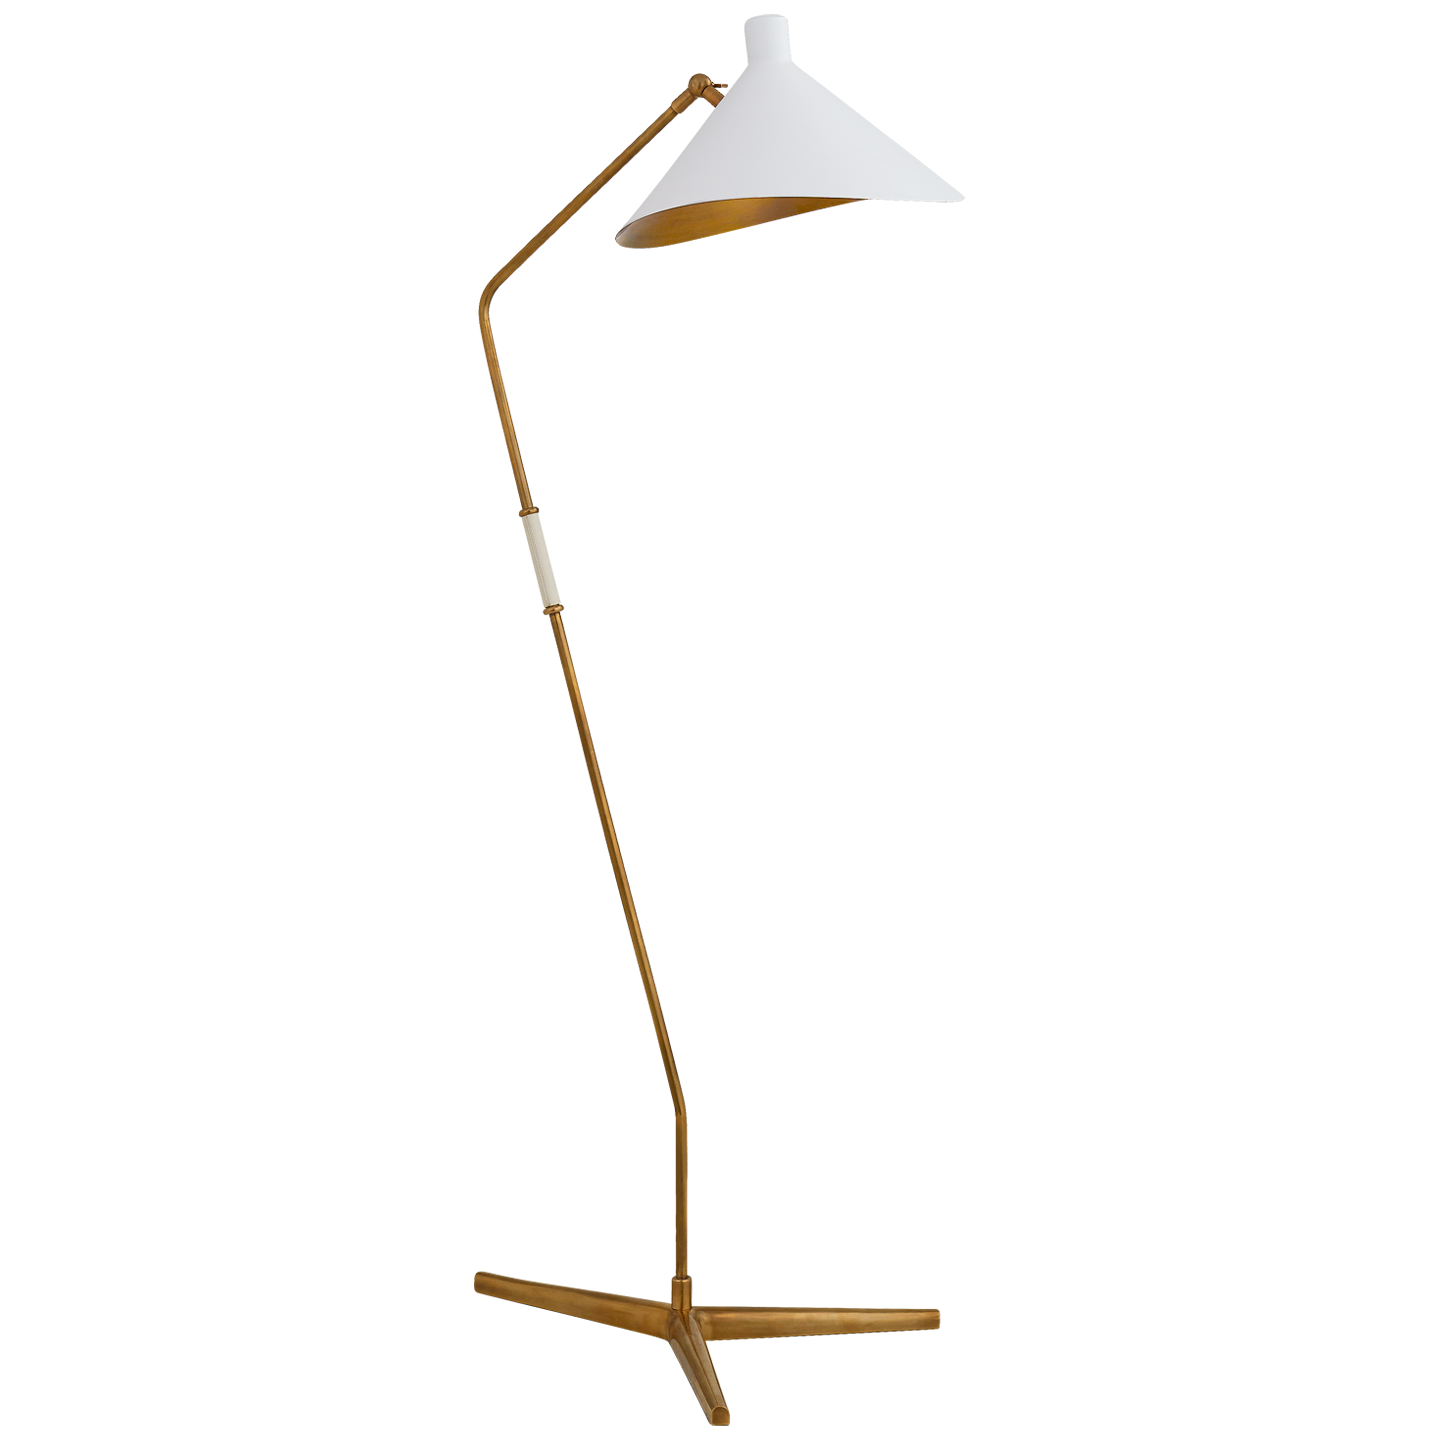 Ladda upp bild till gallerivisning, Mayotte Large Offset Floor Lamp in Hand-Rubbed Antique Brass with White Shade
